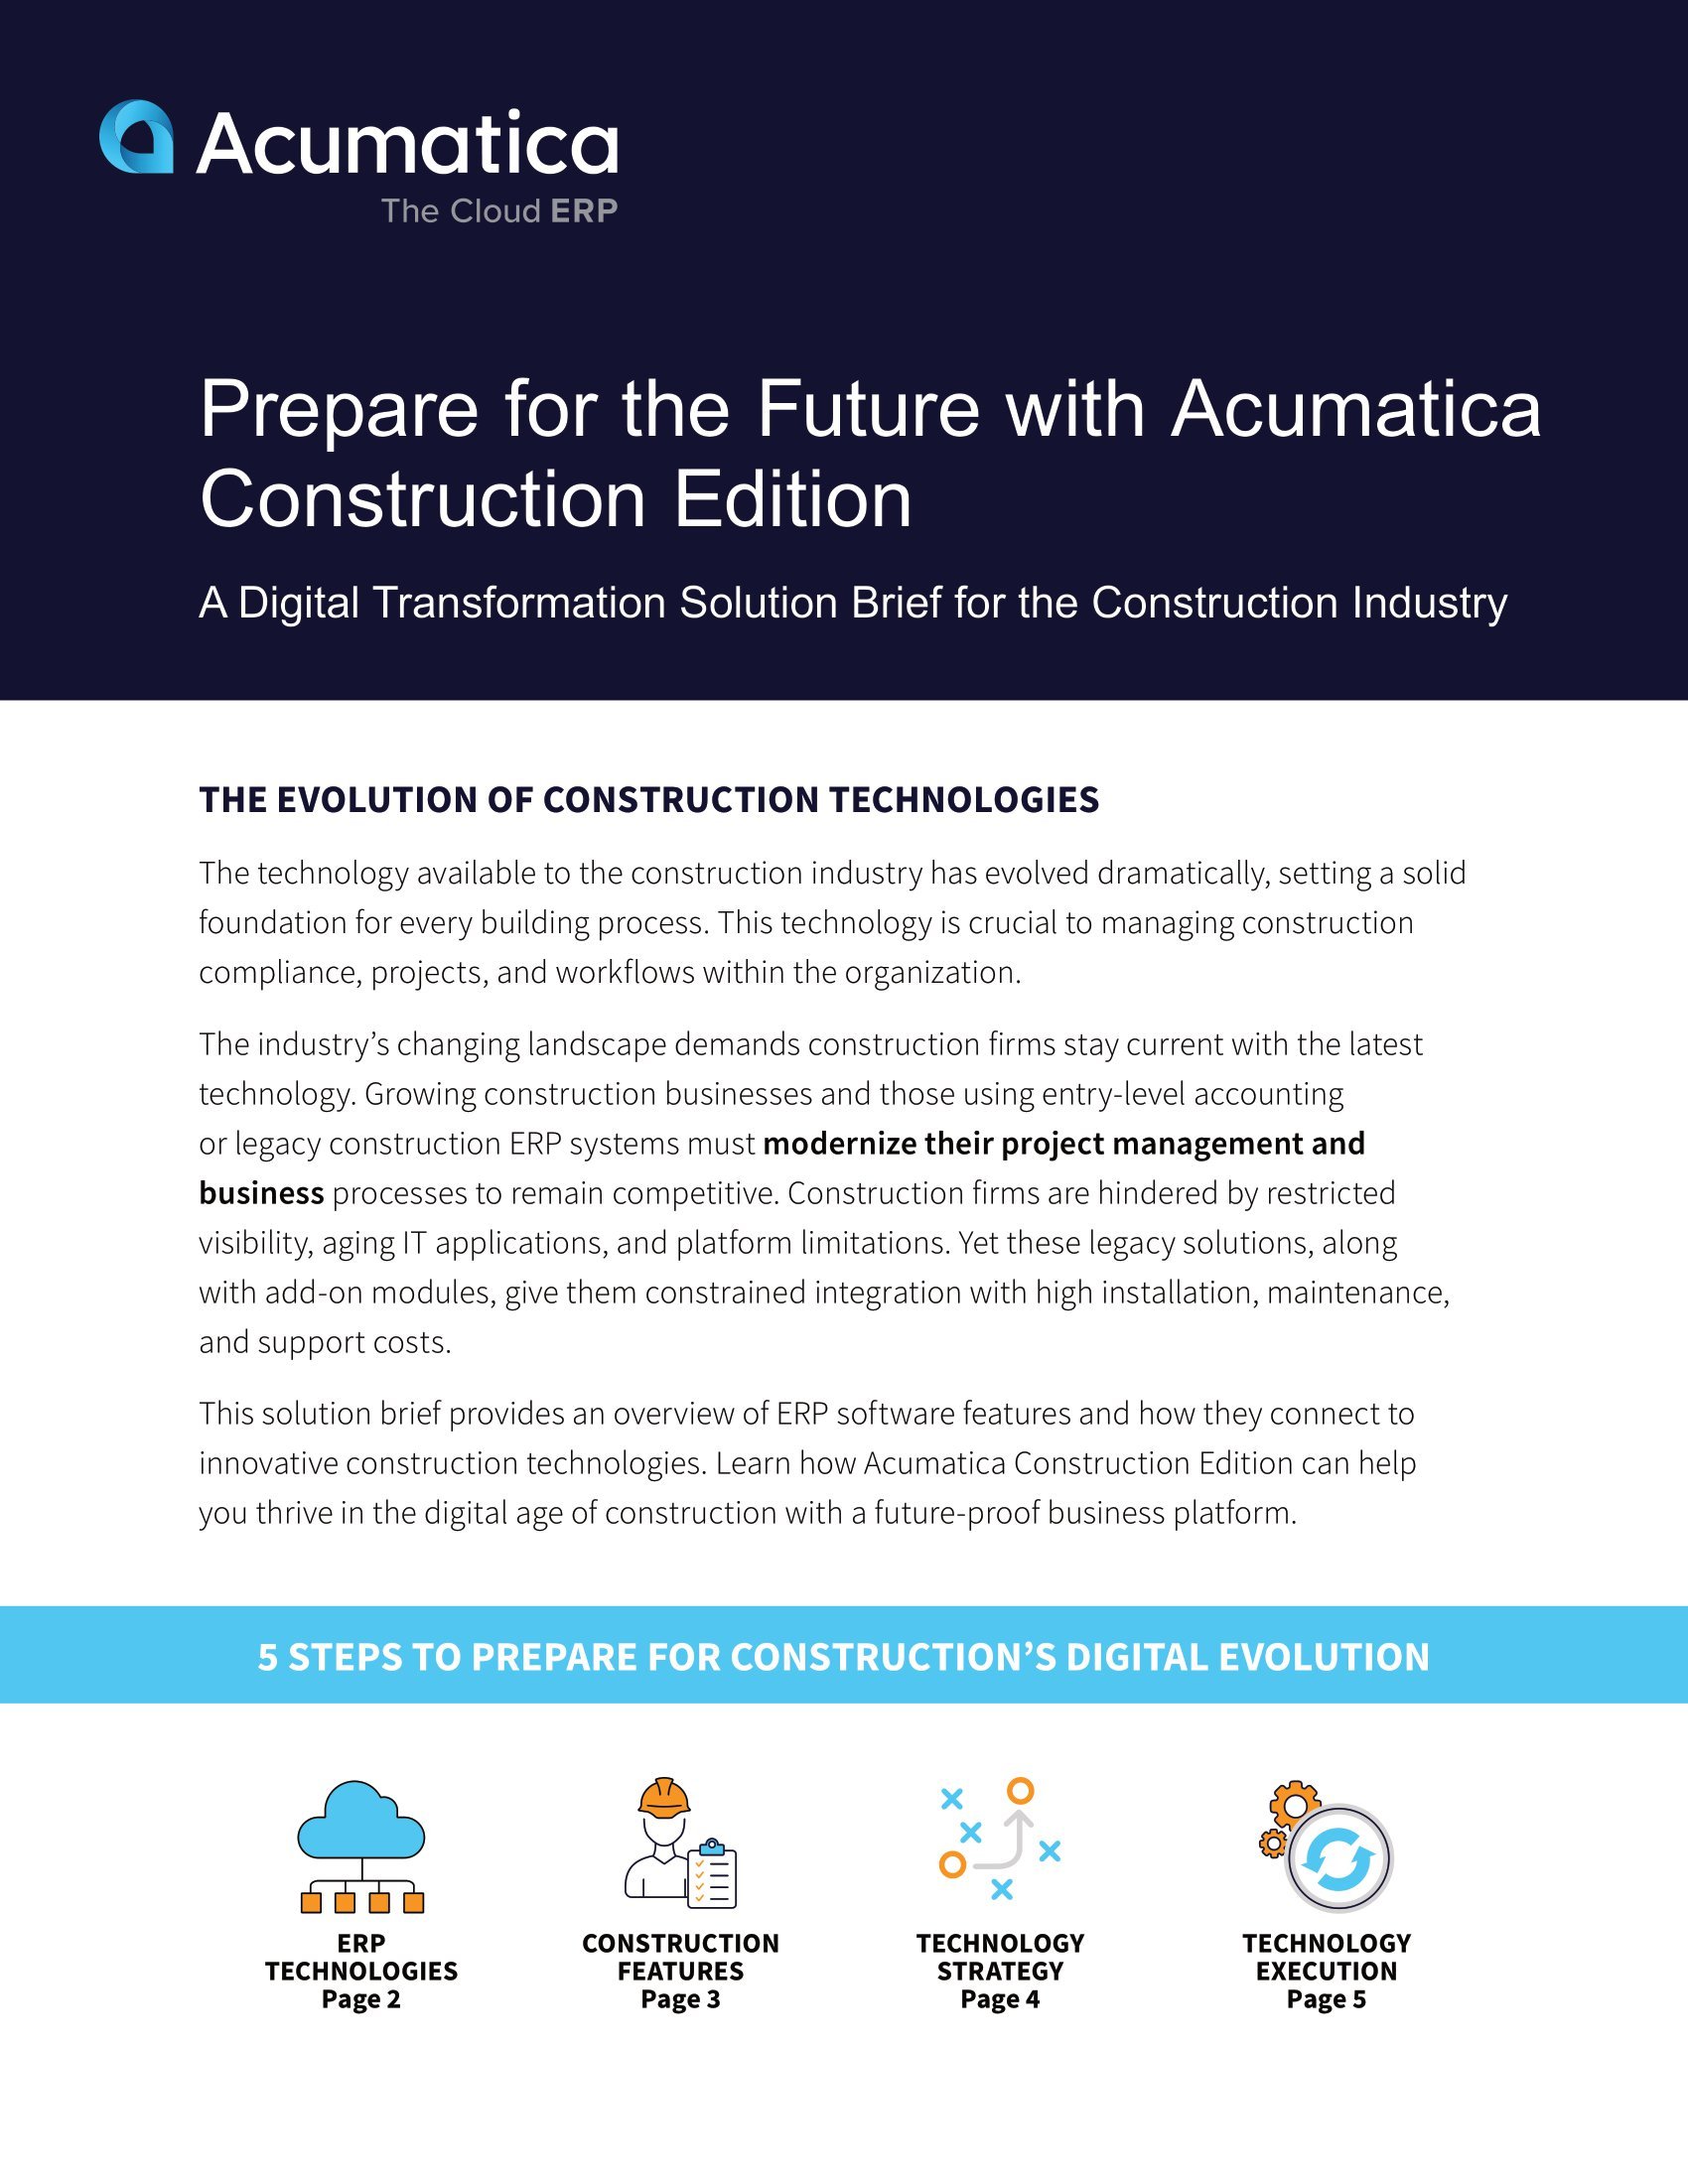 Digital Transformation in Construction: A Must for Growing Construction Businesses